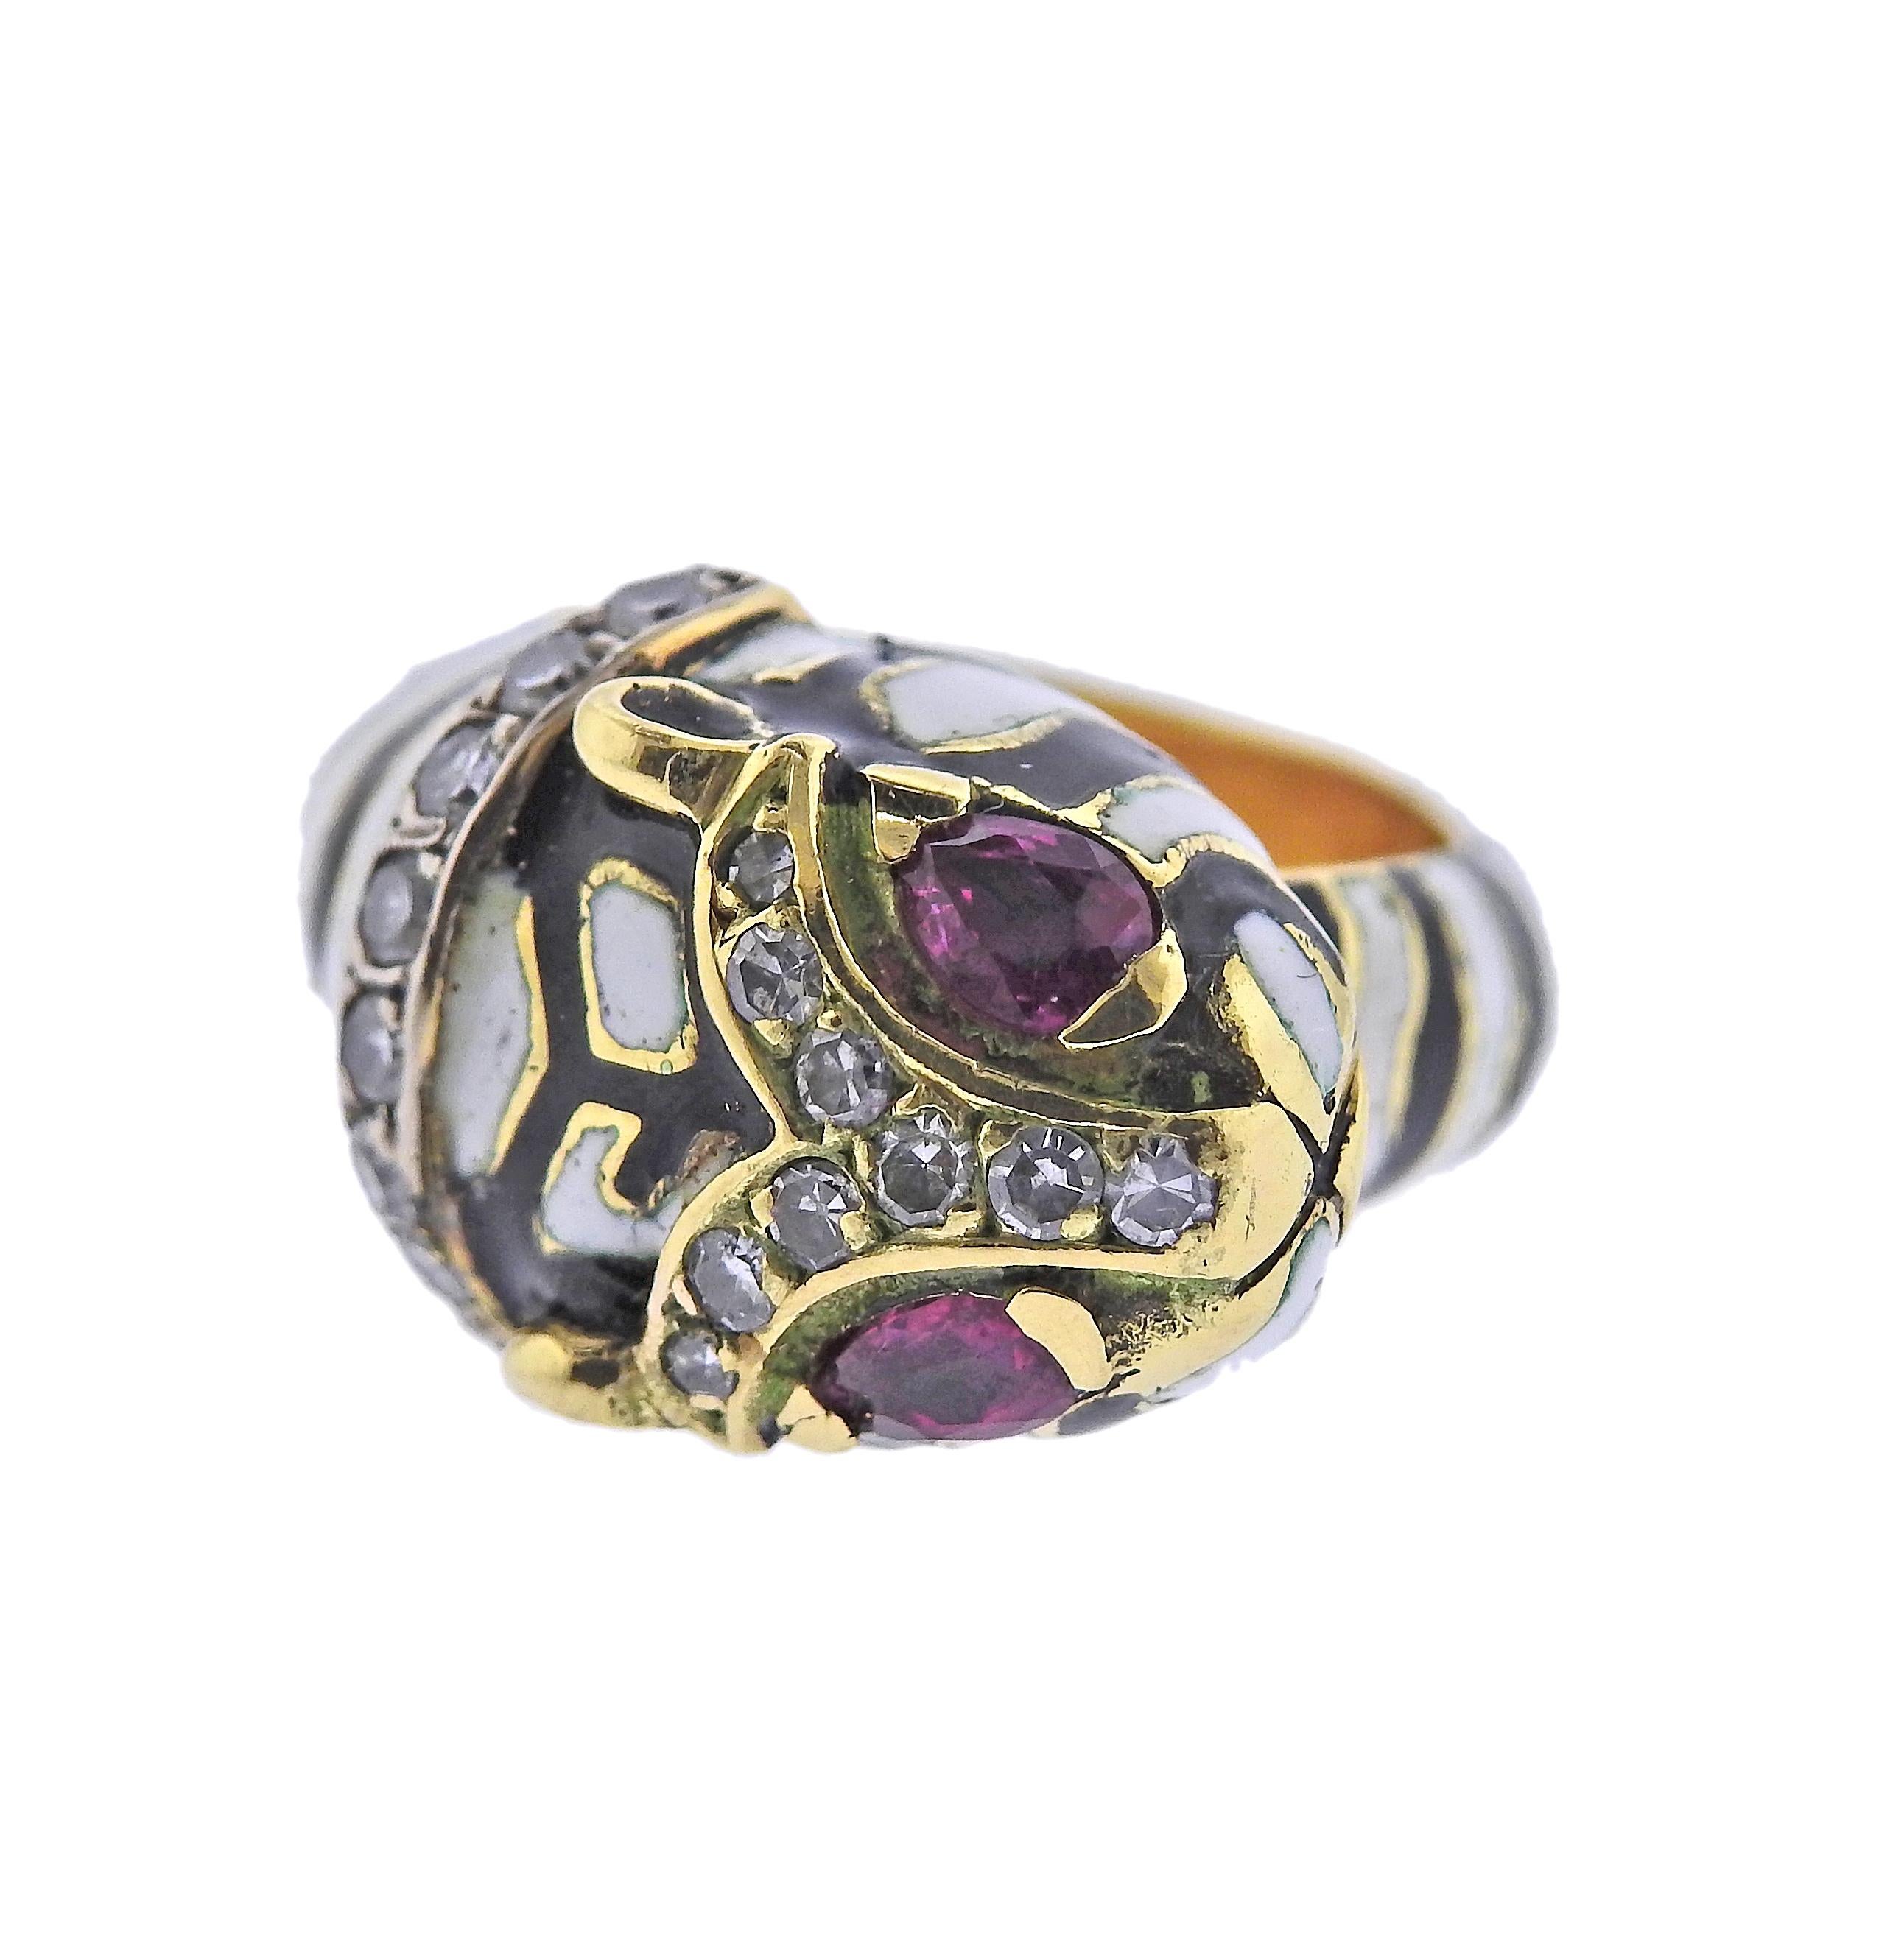 Vintage 18k gold tiger ring, decorated with enamel, ruby eyes and approx. 0.56ctw in diamonds. Ring size - 5, ring top is 13mm wide. Weight - 12.2 grams.